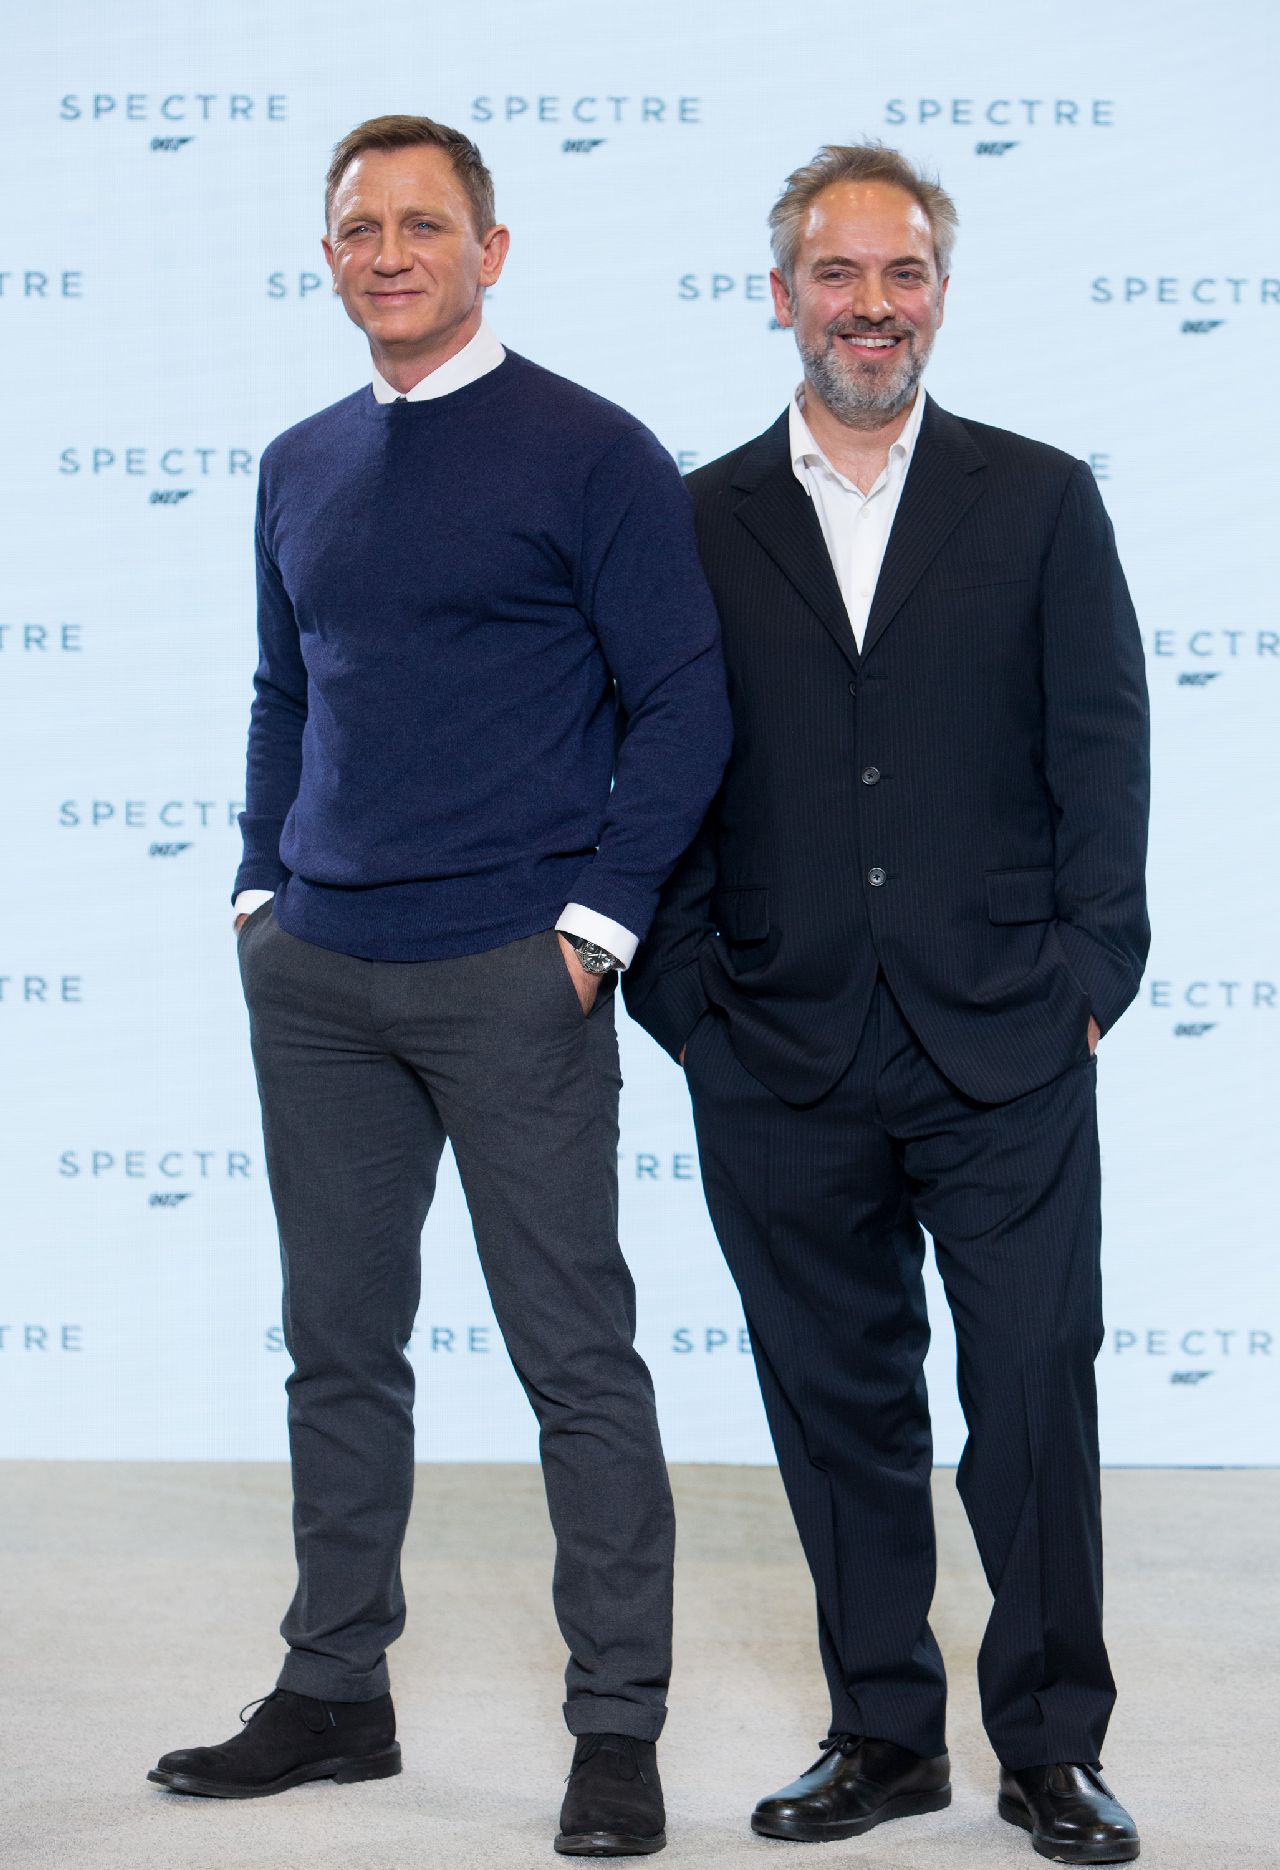 Eon Productions, Metro-Goldwyn-Mayer and Sony Pictures Entertainment announce the 24th James Bond adventure " SPECTRE. " Pictured: (L to R) Daniel Craig and Sam Mendes.